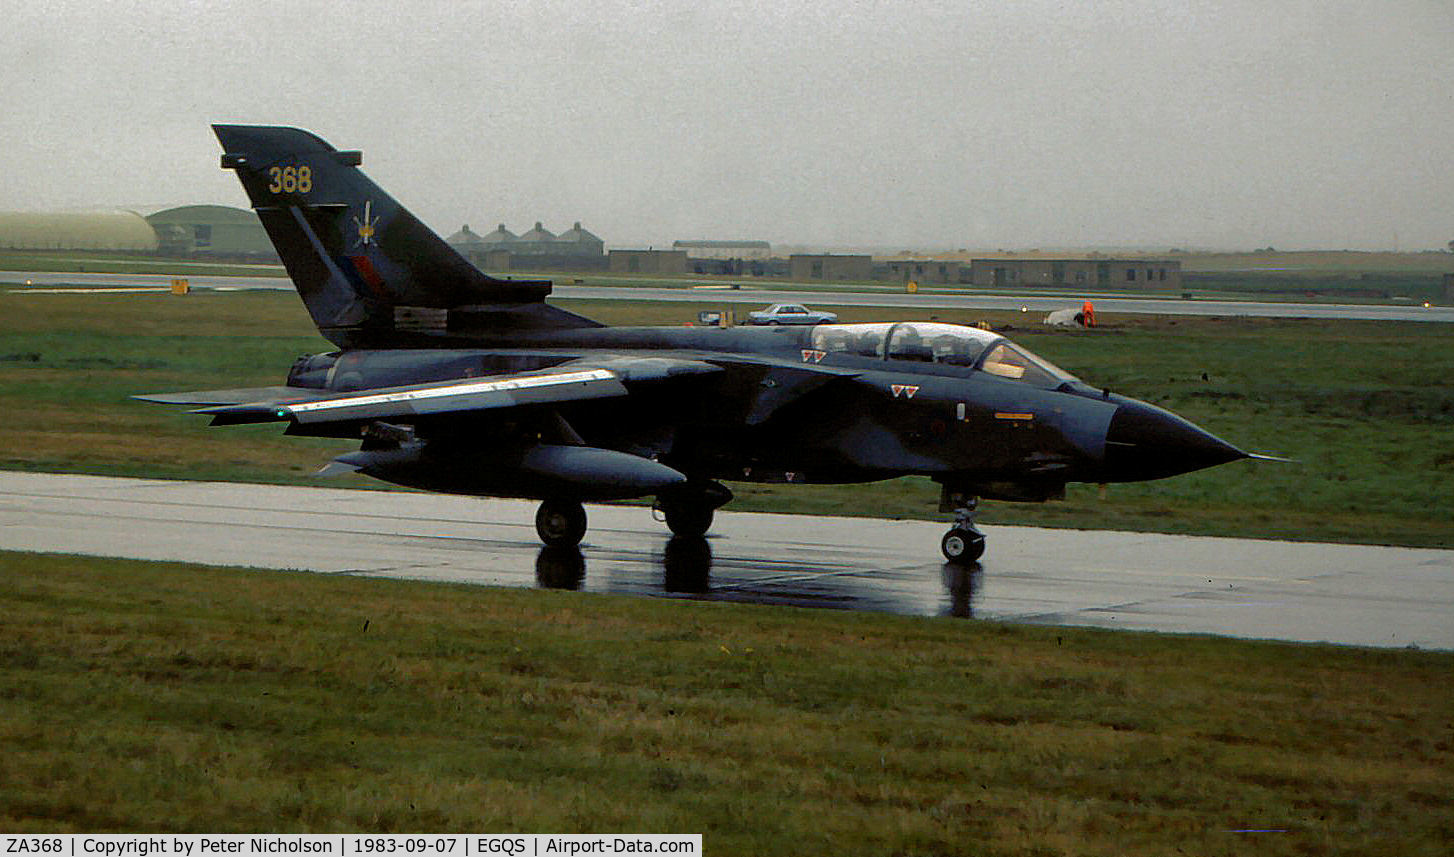 ZA368, 1982 Panavia Tornado GR.1 C/N 163/BT032/3082, Tornado GR.1 of the Tactical Weapons Conversion Unit as seen at RAF Lossiemouth in the Summer of 1983